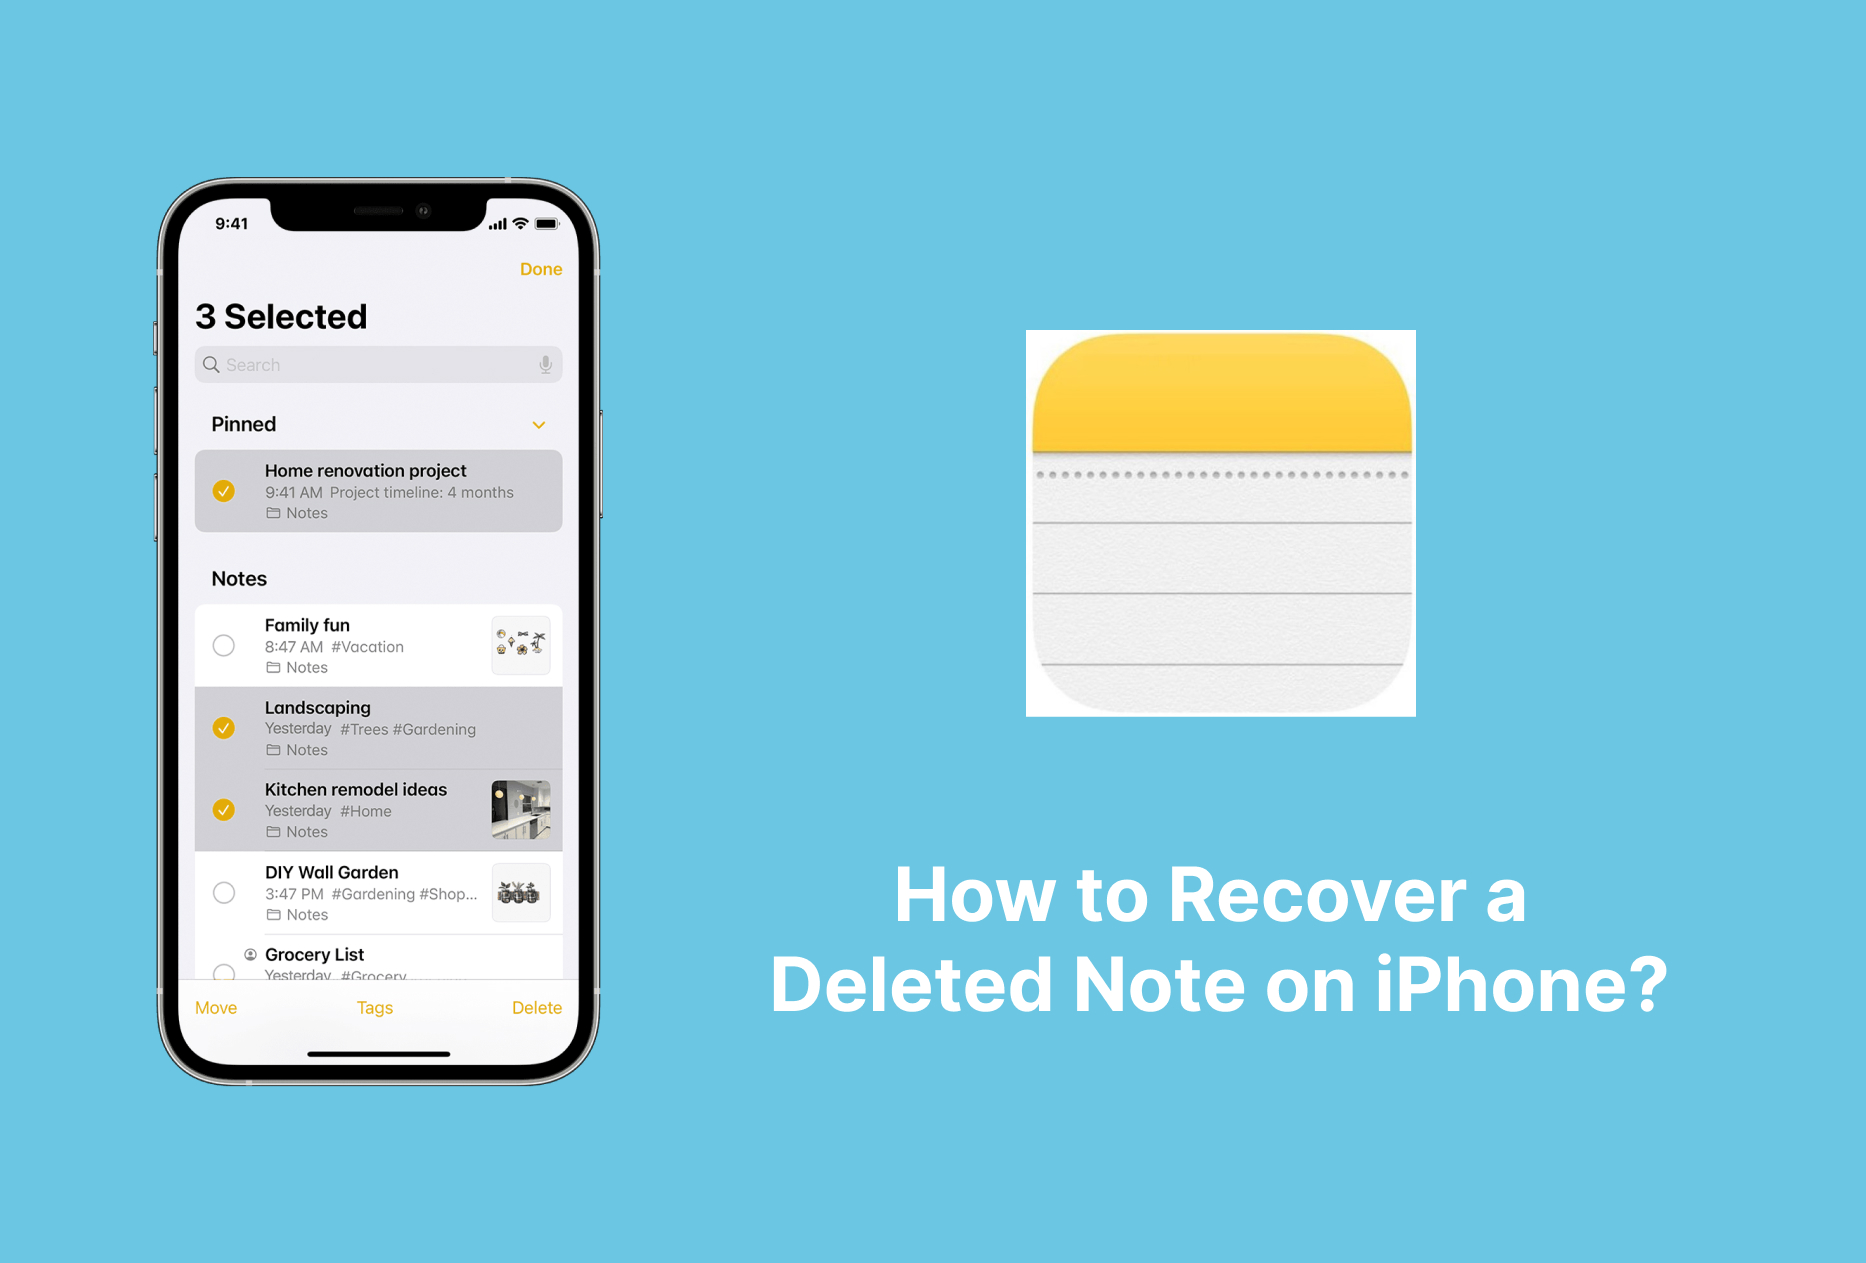 How to Recover a Deleted Note from My iPhone